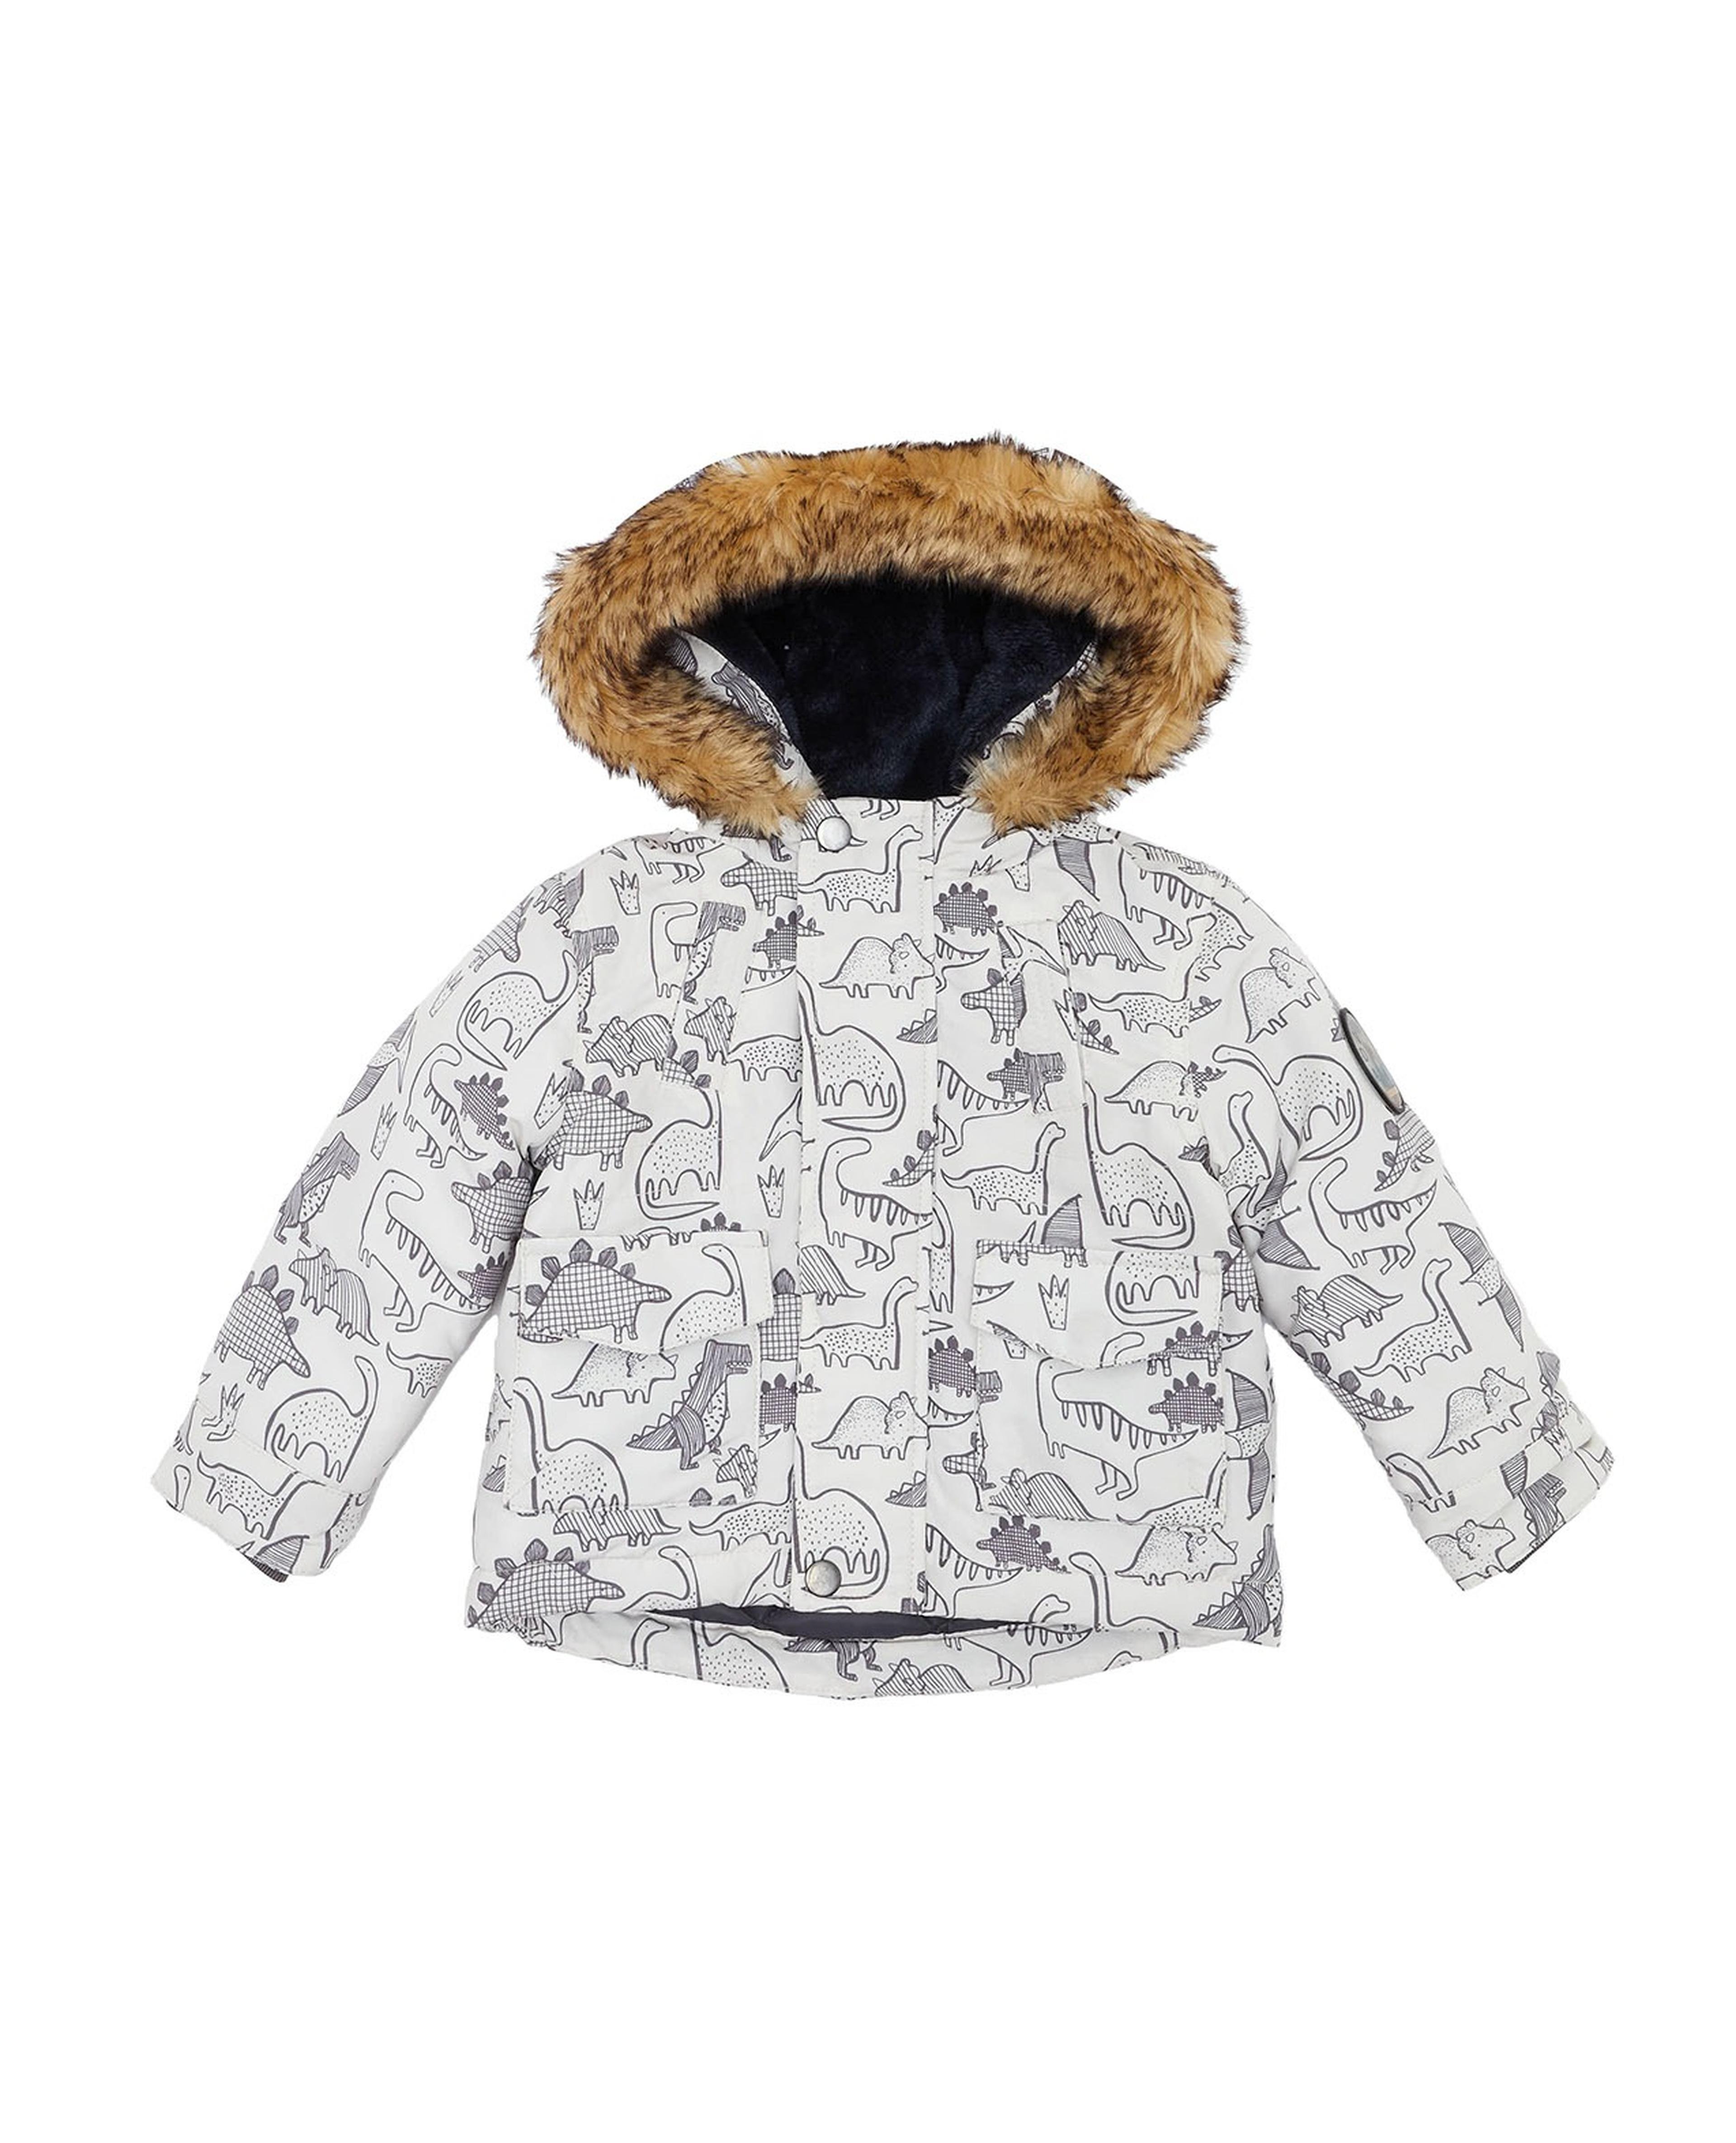 Dino Print Hooded Jacket with Zipper Closure